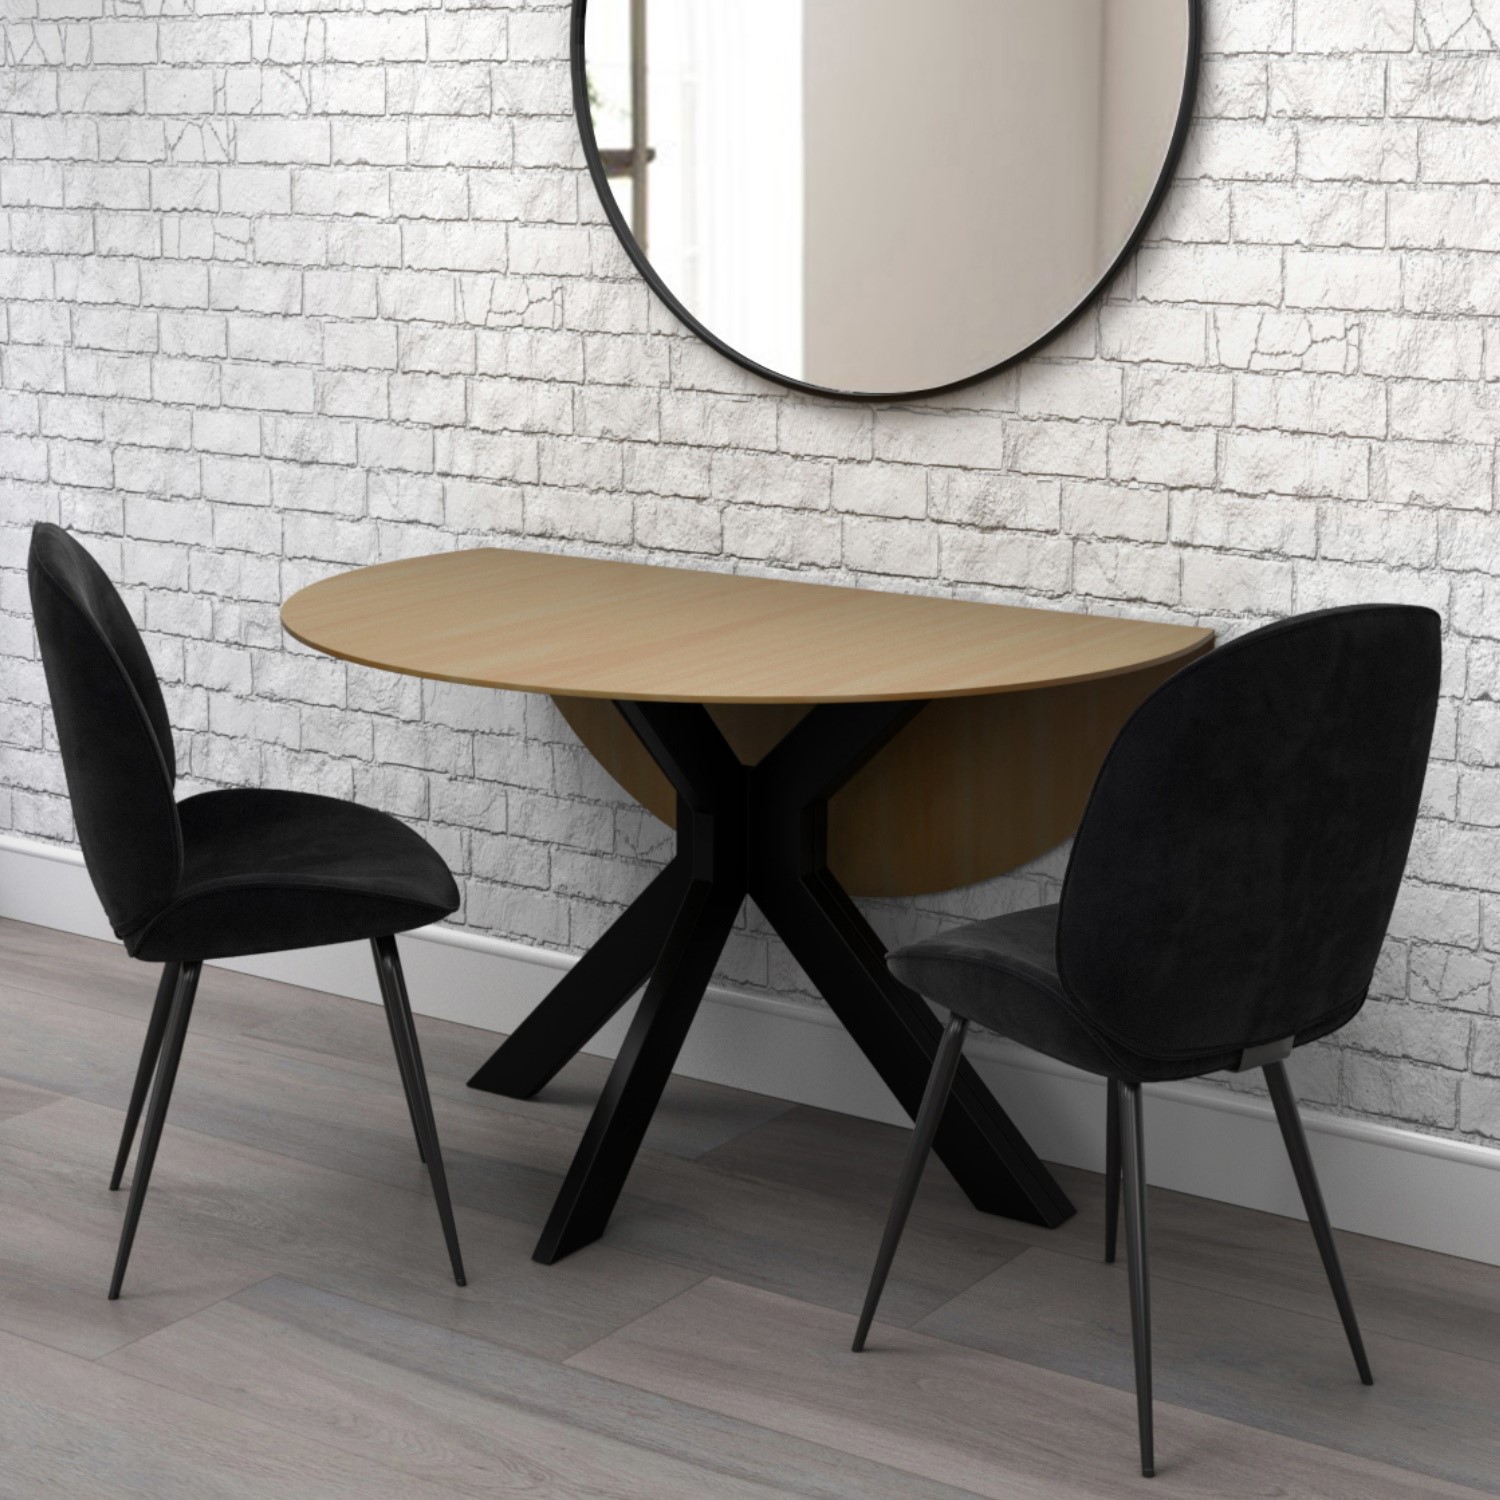 Photo of Light oak drop leaf dining table with 2 black velvet dining chairs - carson